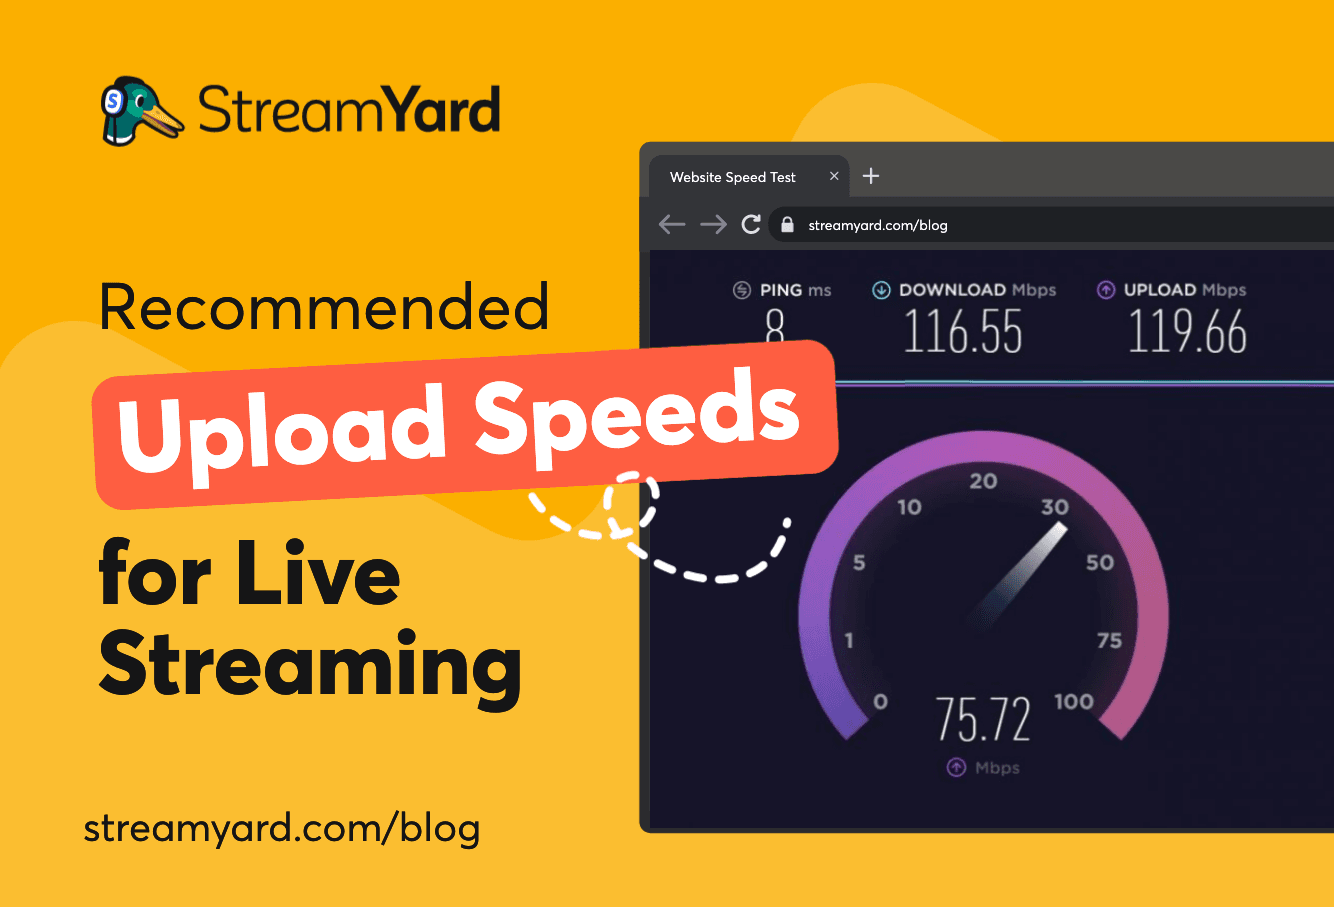 Learn whether upload speeds for live streaming, or download speeds matter most for live streaming.